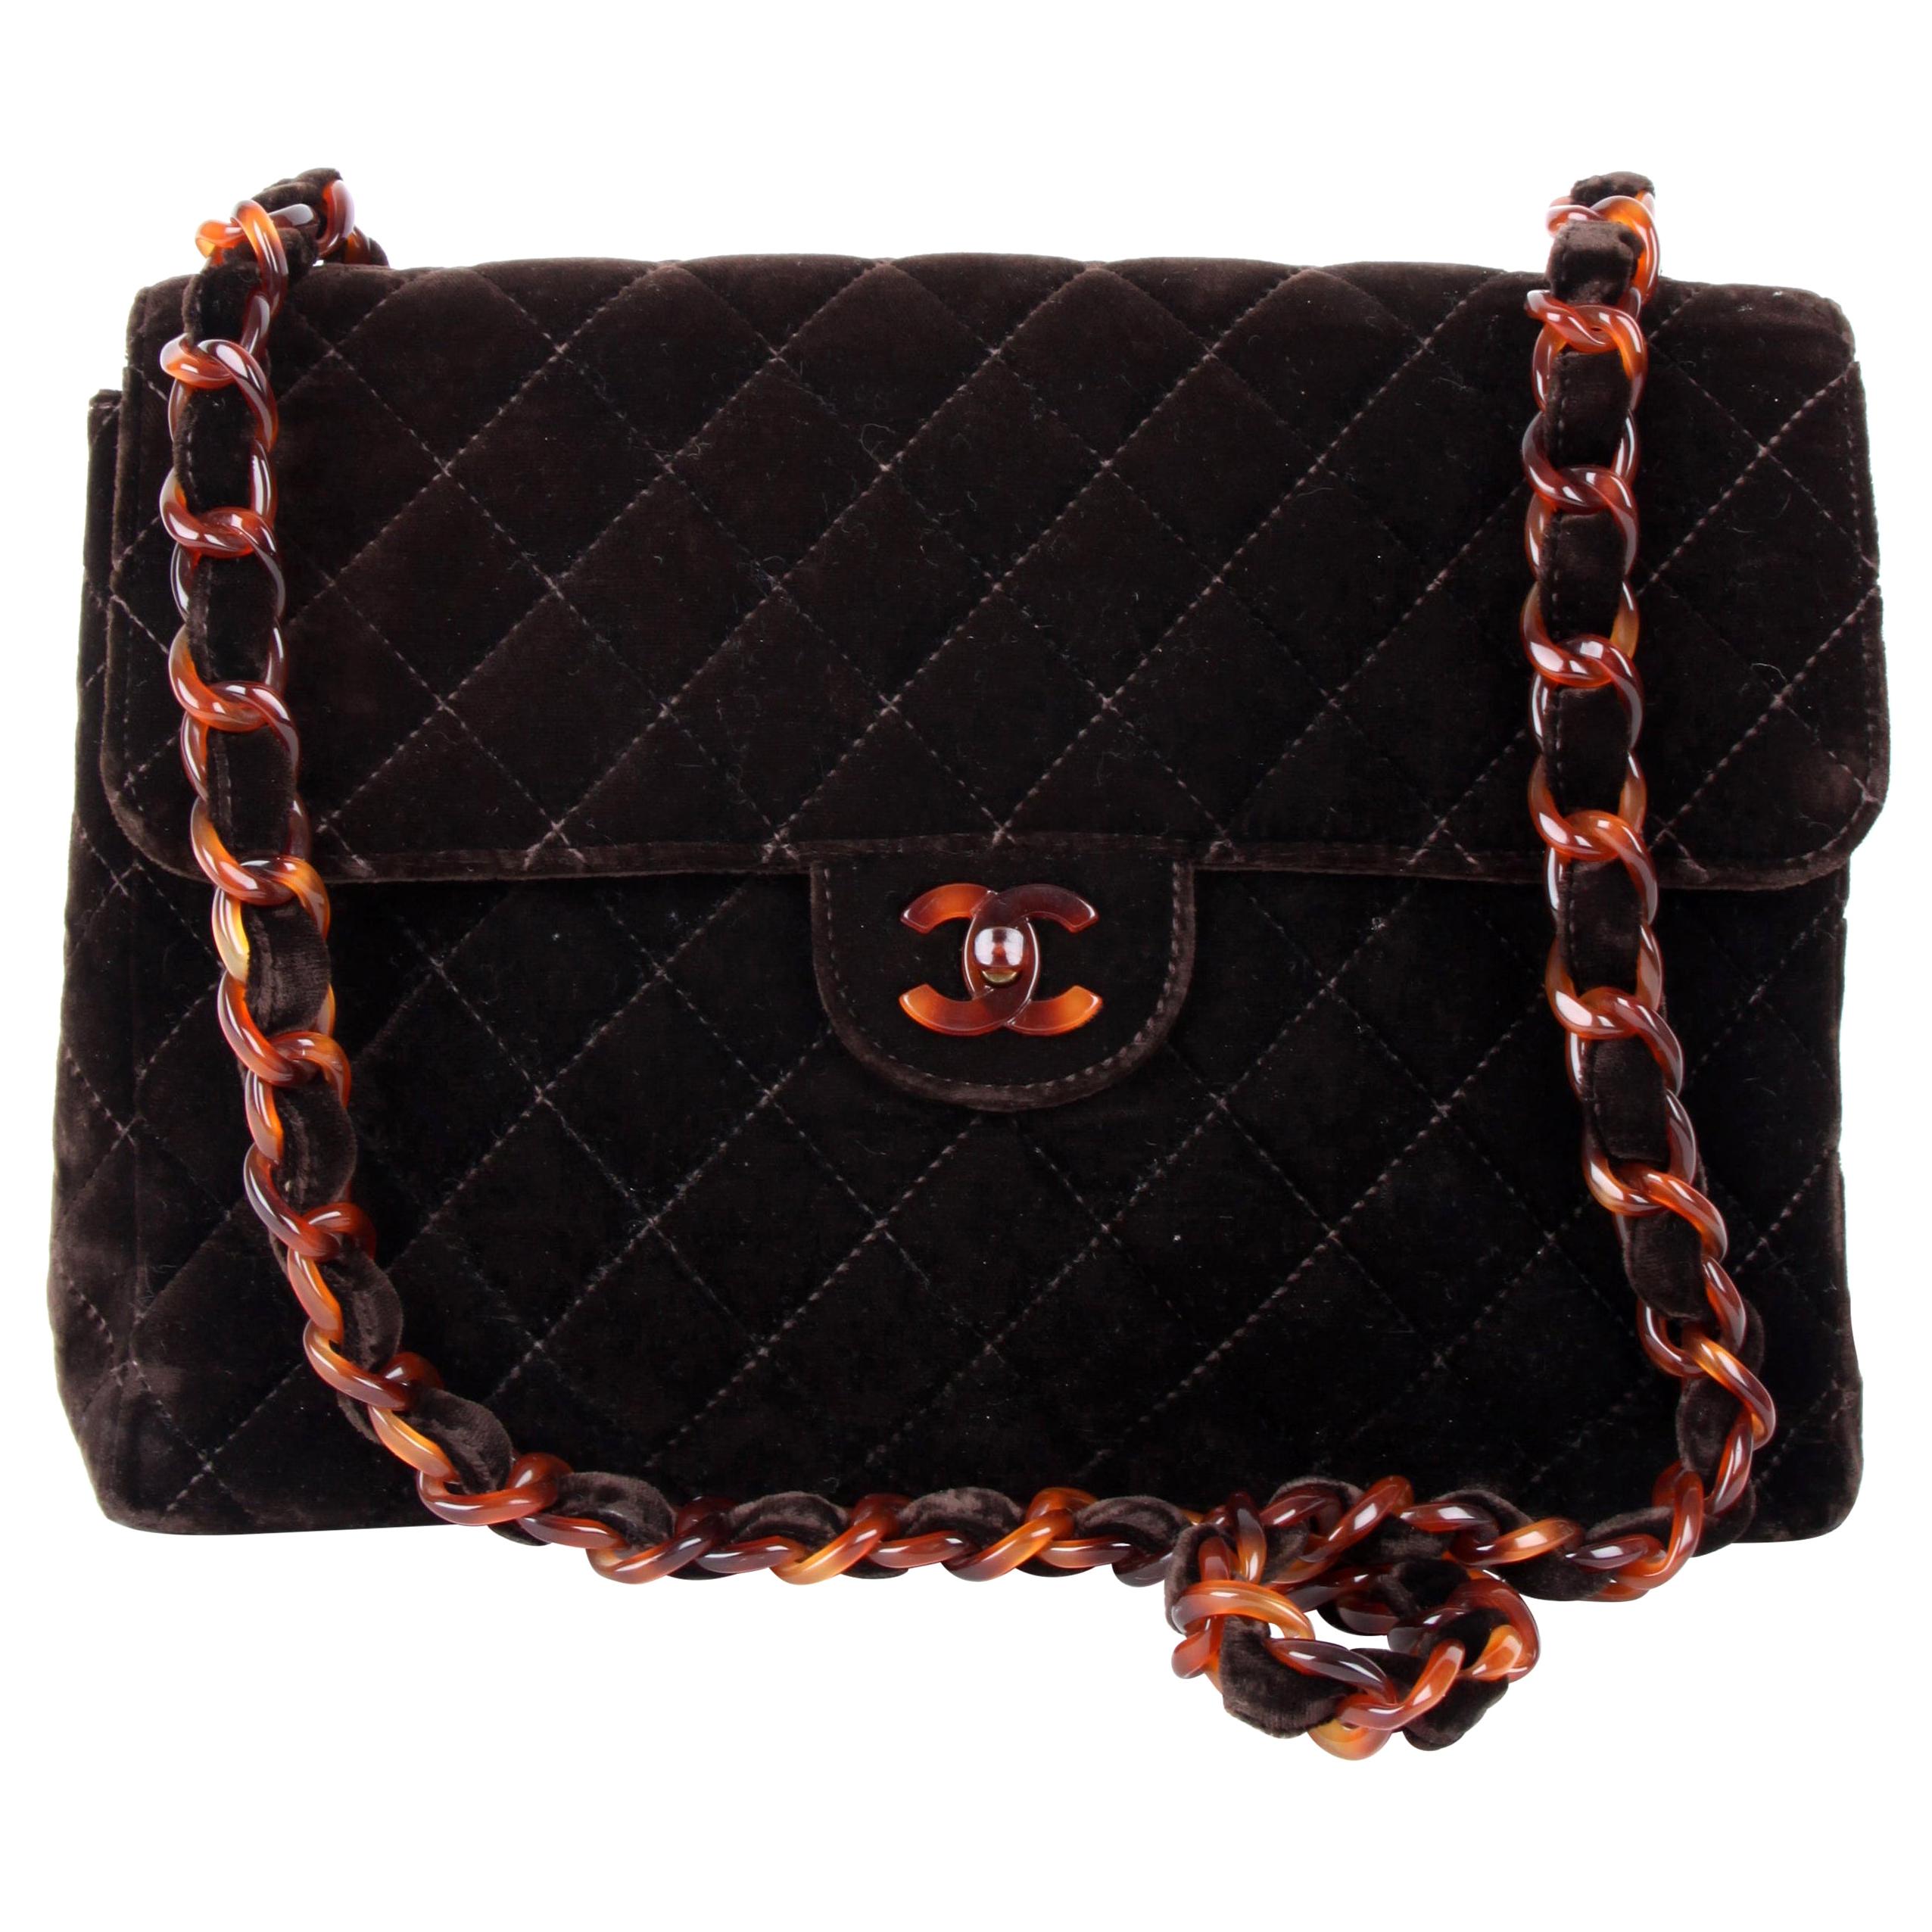 Chanel Brown Suede Quilted Tortoiseshell Hardware Flap Bag For Sale